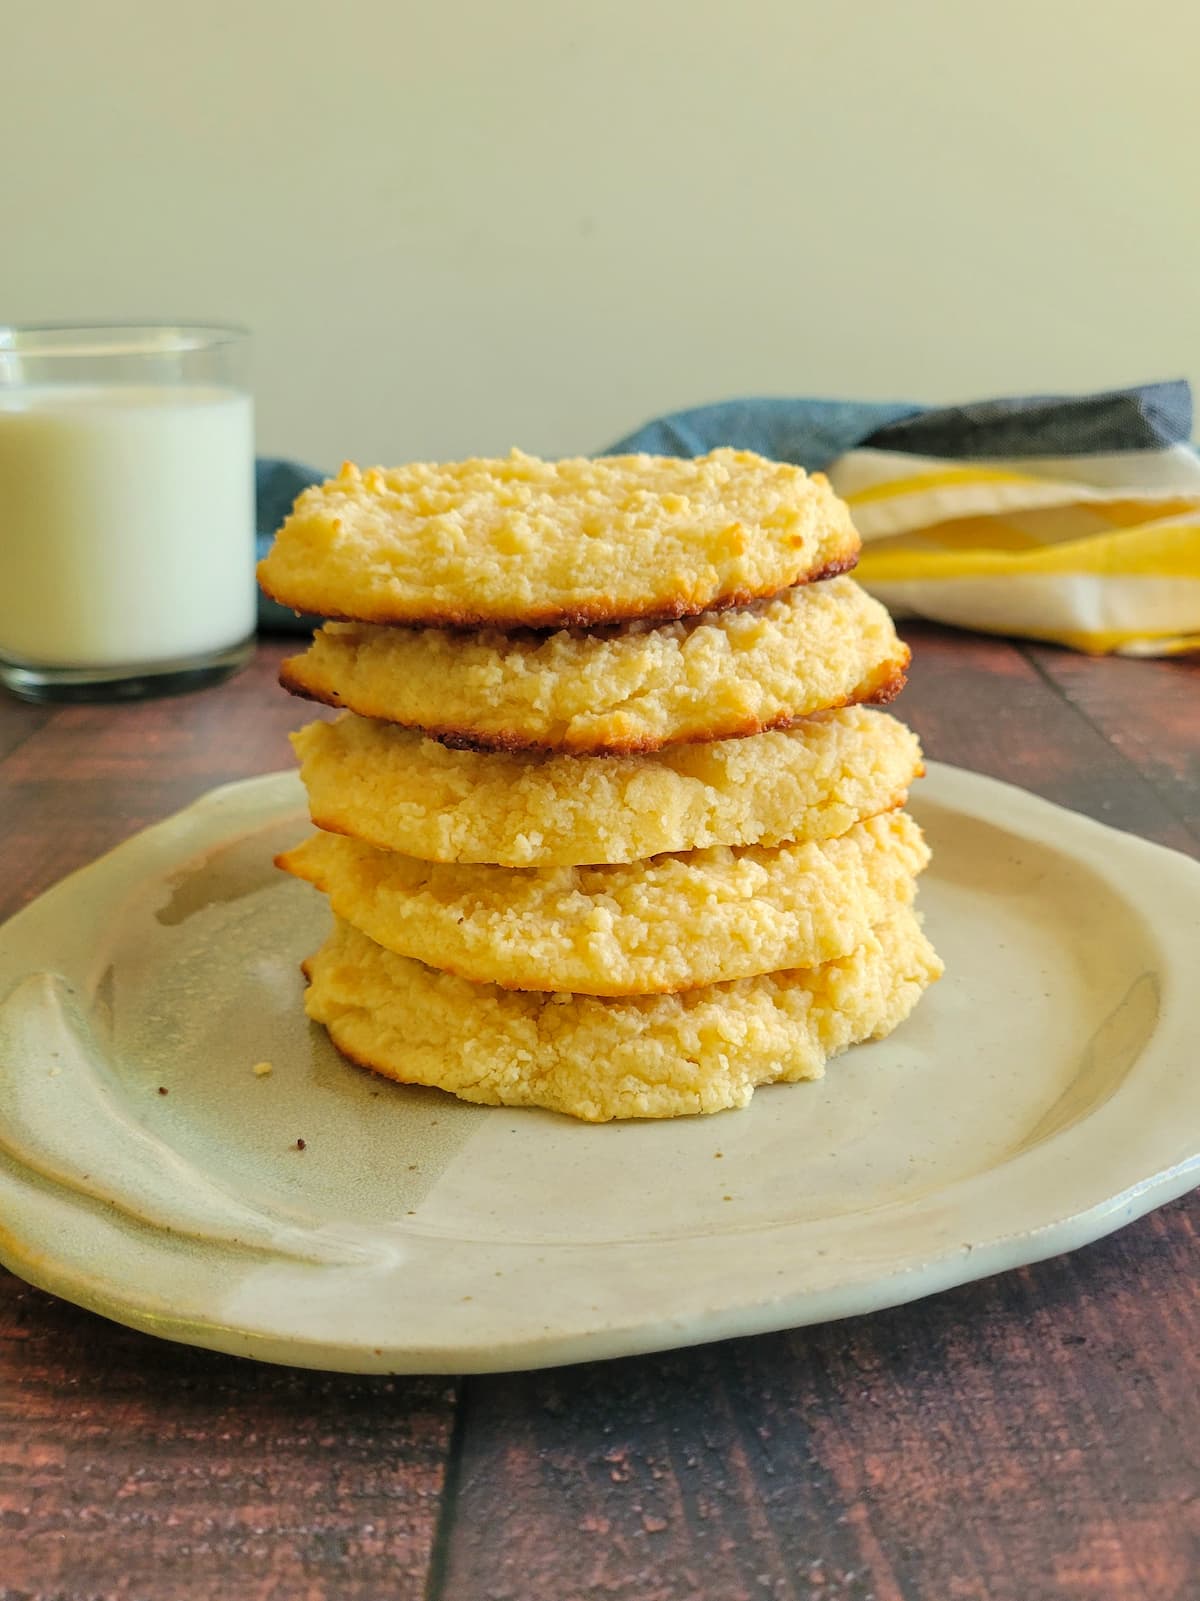 5 cookies stacked on a plate, glass of milk in the background